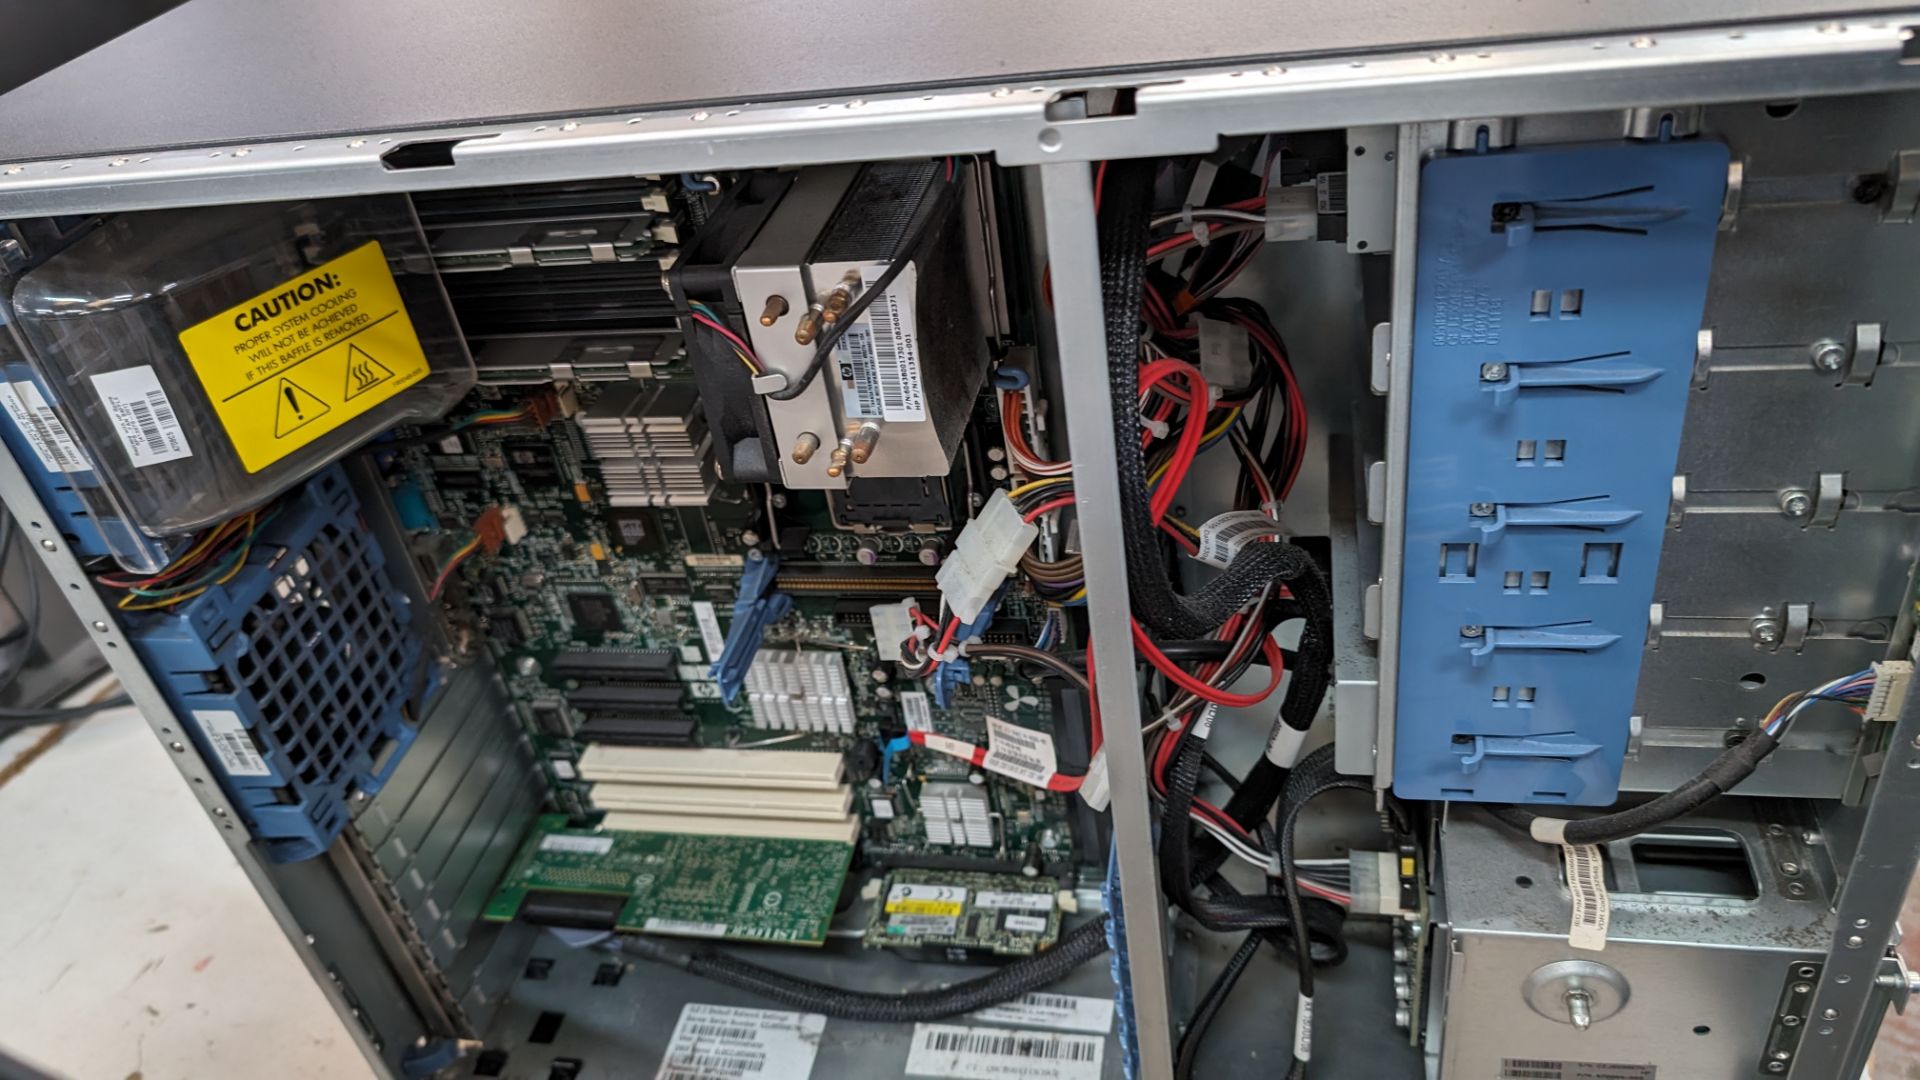 HP server incorporating 2 off hot swap drives, optical drive & HP Storageworks DAT 160 tape drive - Image 15 of 15